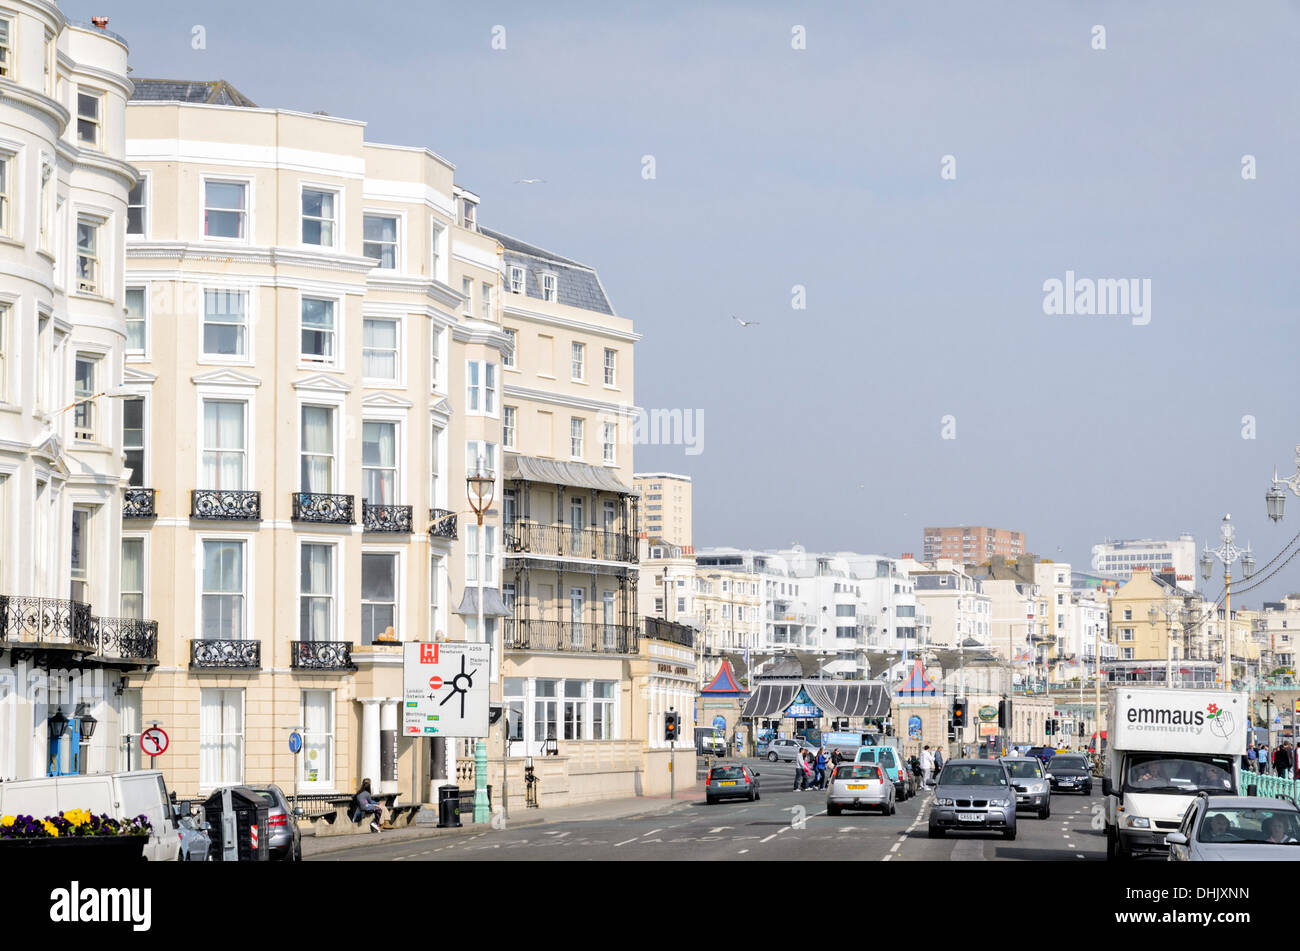 Light coloured Victorian-era hotels on the sea front; typical English seaside resort scene. Stock Photo